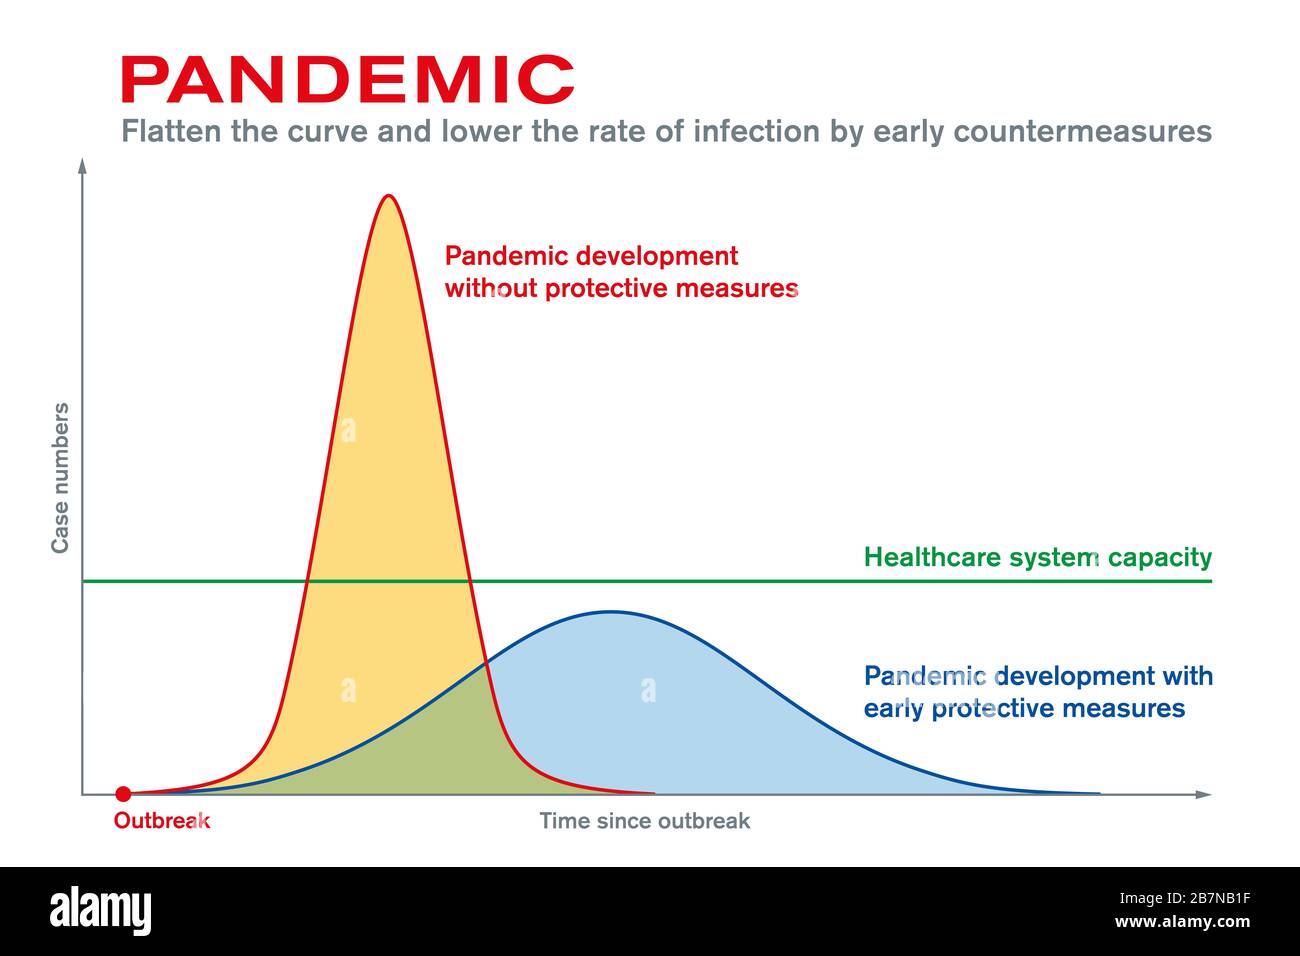 Pandemic. Flatten the curve, lower the rate of infection by early countermeasures. Protective measures after outbreak maintain the healthcare system. Stock Photo